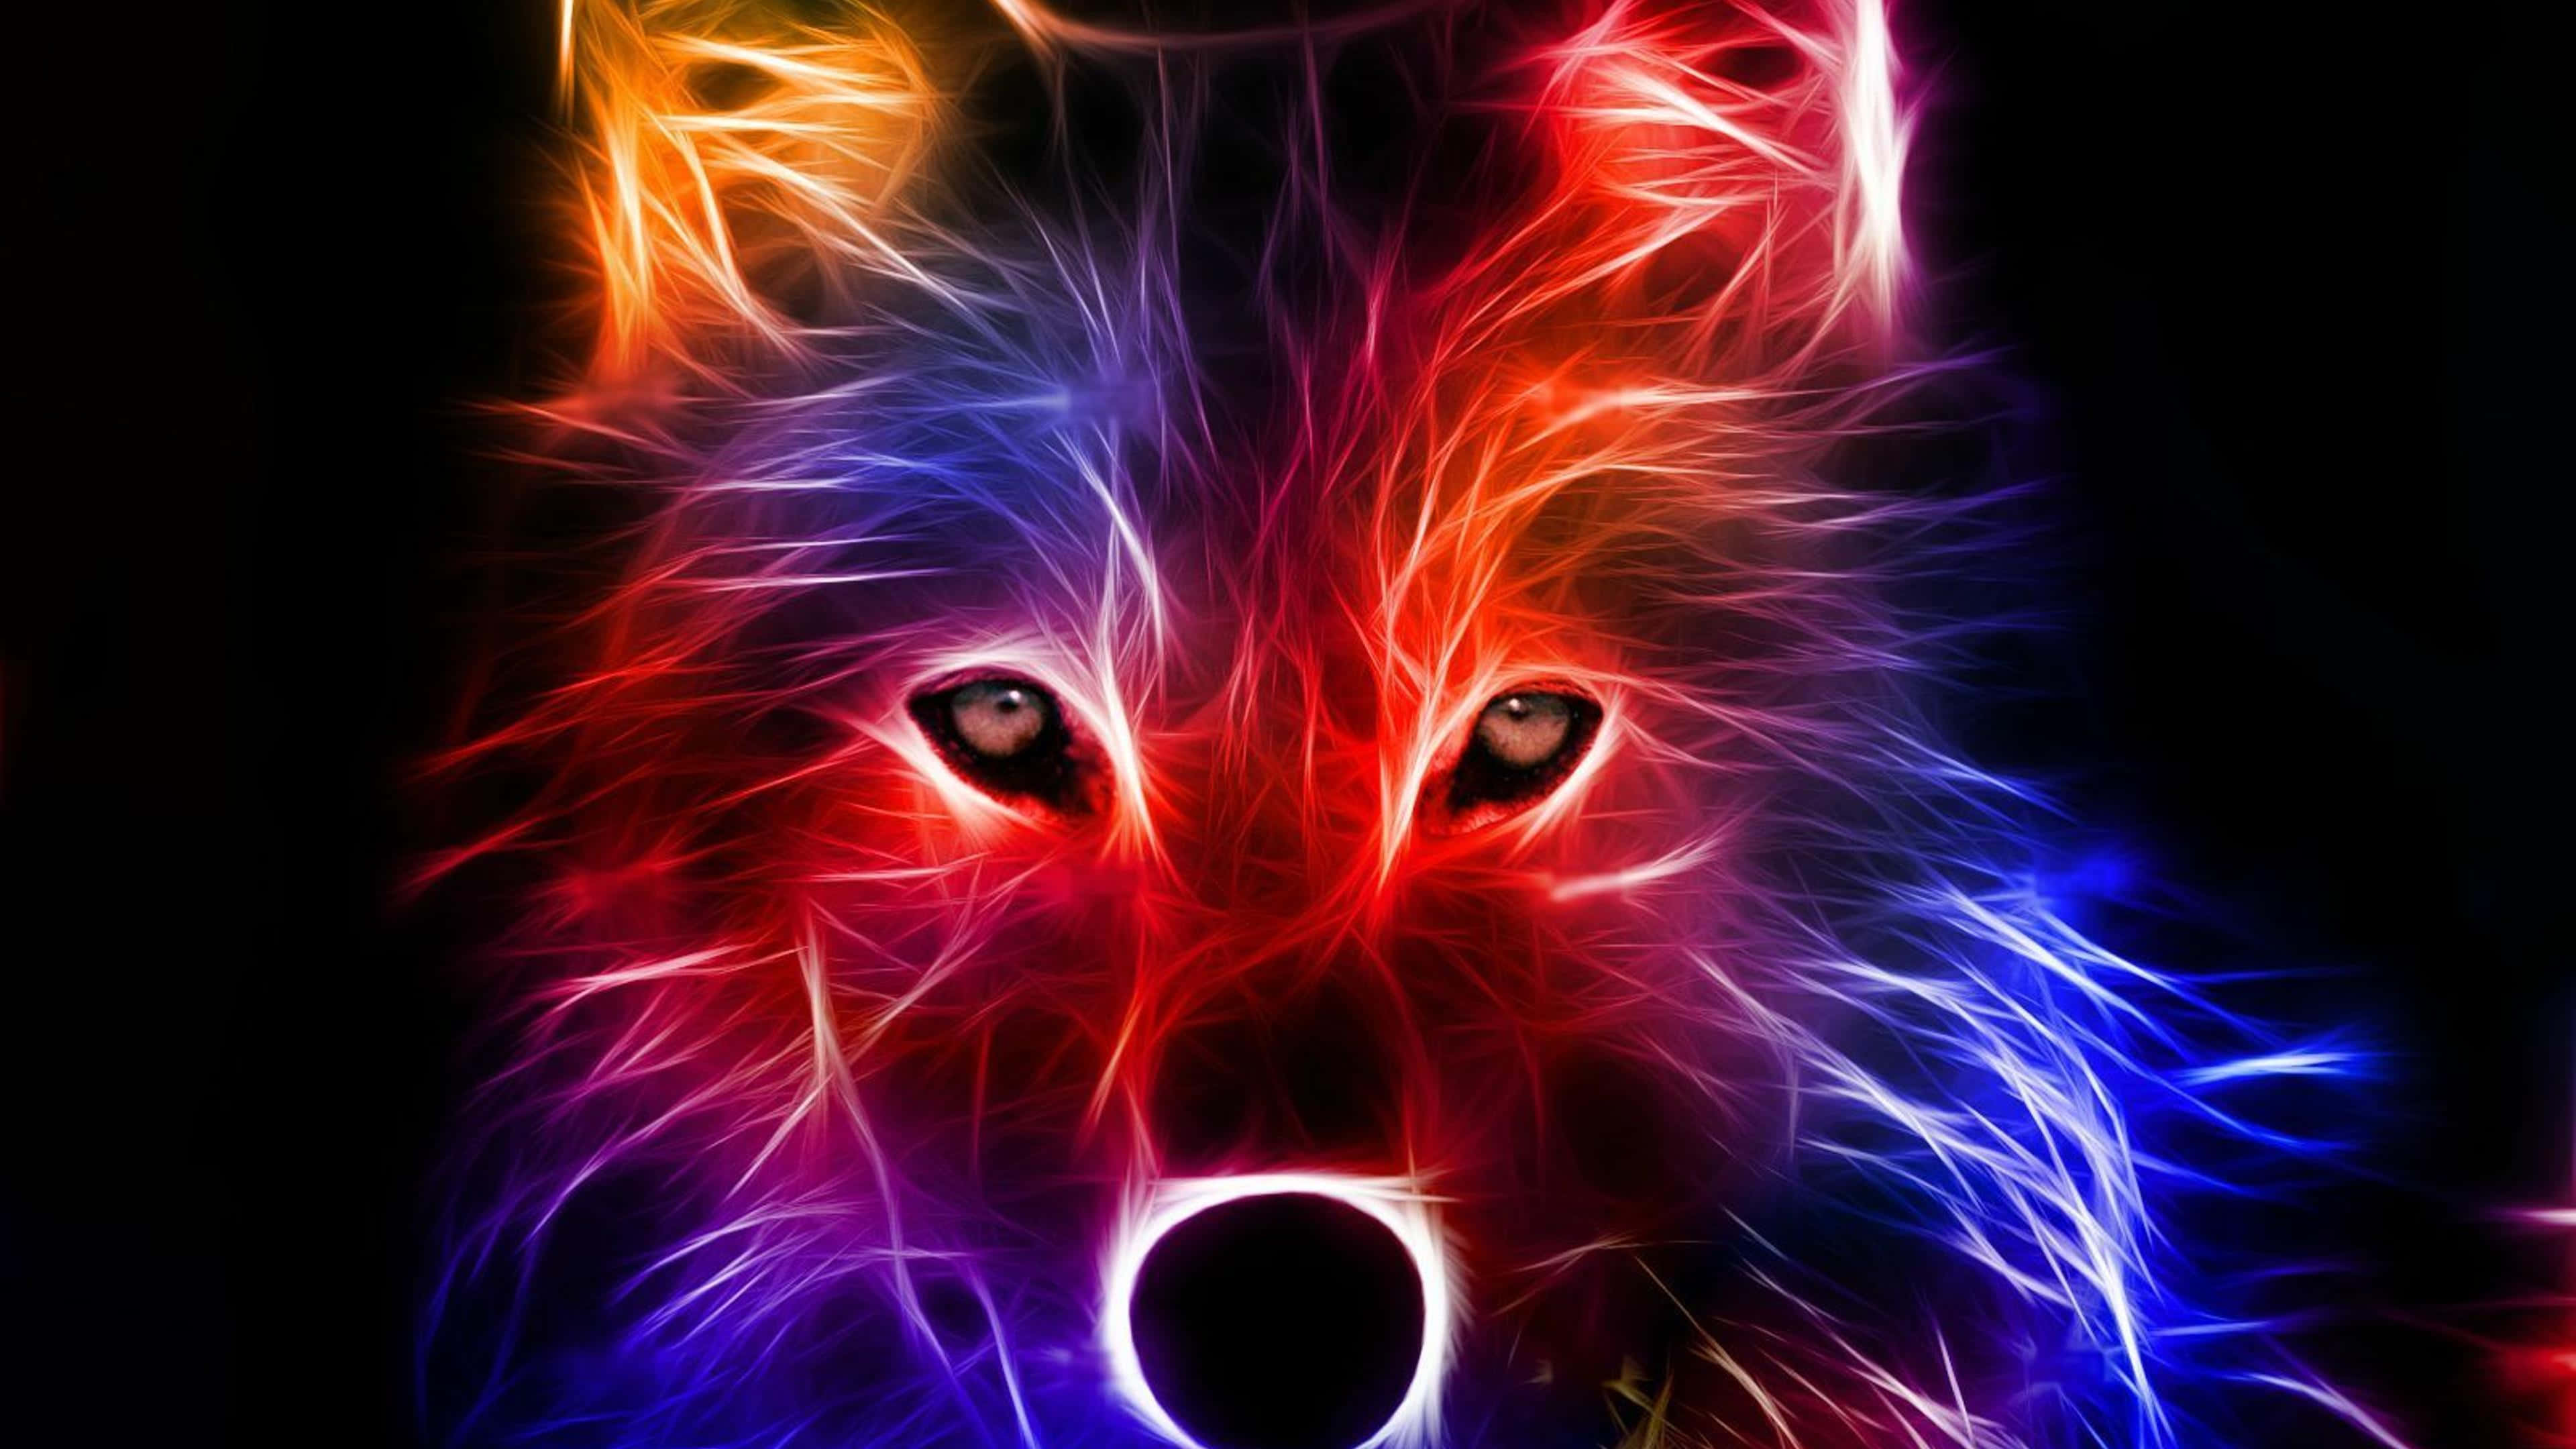 "A fierce and magical Water and Fire Wolf combined forces" Wallpaper